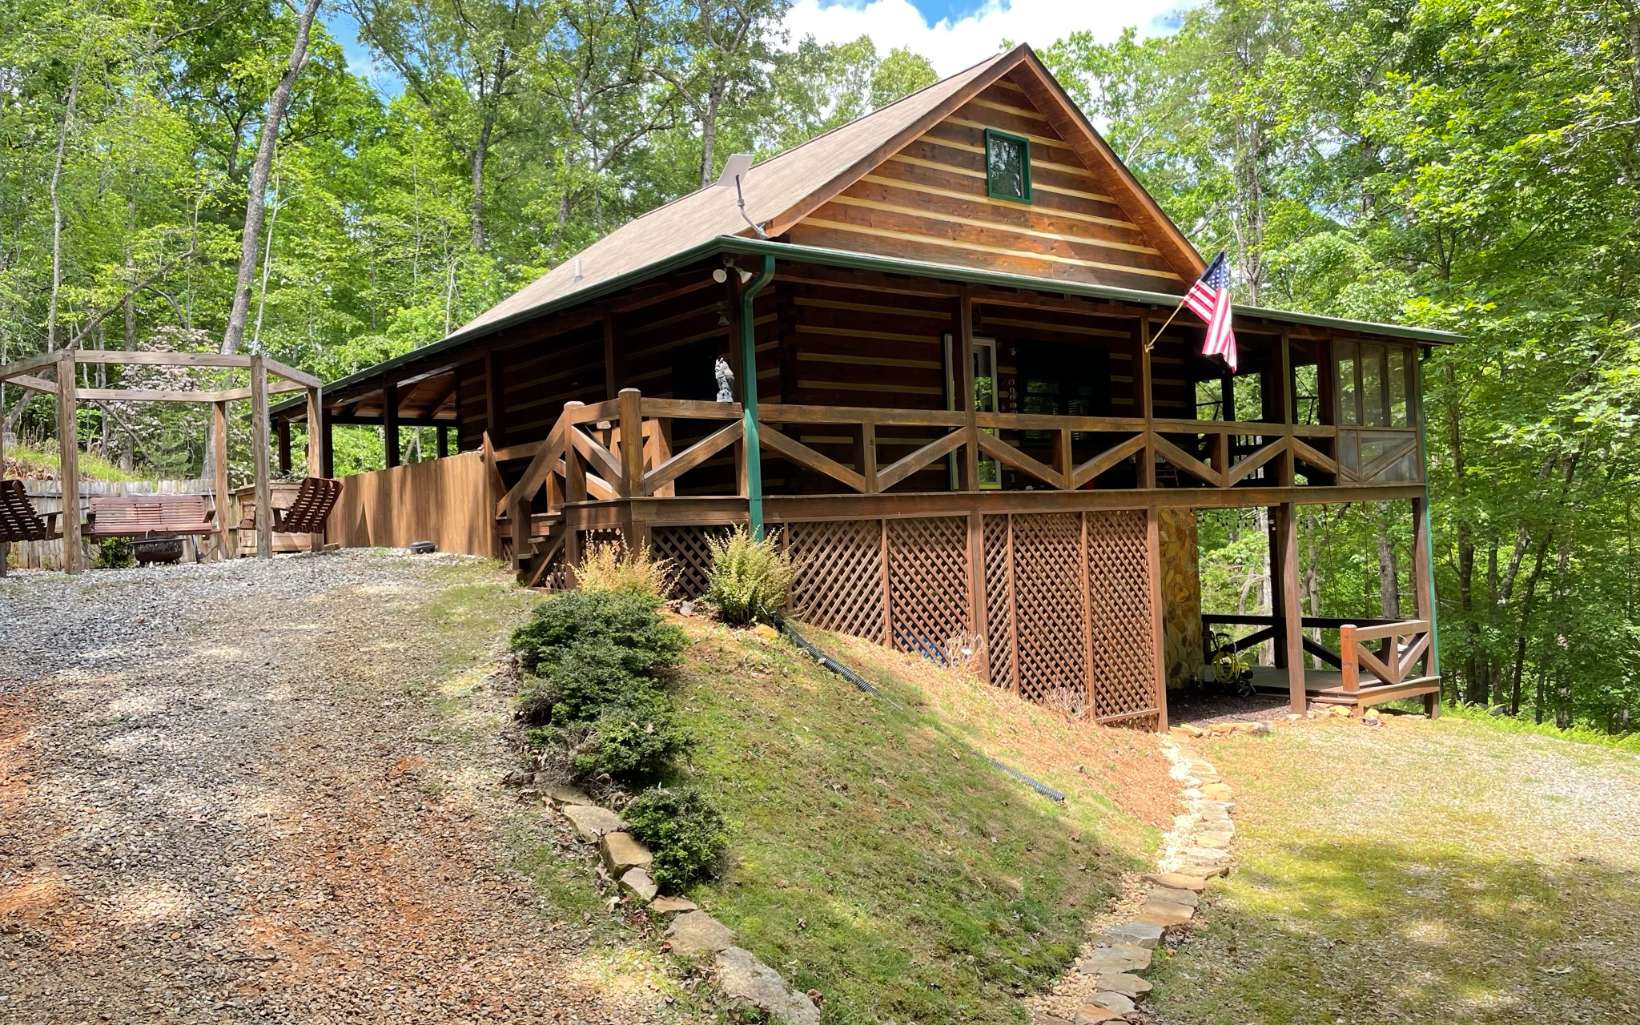 AUTHENTIC LOG CABIN IN THE ASKA ADVENTURE AREA!! Situated on 1.54 private acres with Weeks Creek frontage, this cabin features an open concept design, cathedral ceilings with exposed beams, and a stone fireplace. 3 bedrooms/3 baths...main floor bedroom w/private access to the wrap around deck. Upper level bedroom is open loft with it's own bathroom and an additional sleeping area. The terrace level offers another bedroom with bunk beds and a game room. Outside is the perfect place to relax...the wrap around deck offers plenty of space to unwind after a long day. Or take a stroll down to the creek to enjoy nature at it's finest. Close to all outdoor activities...hiking trails, fishing, USFS land, tubing...and, only a short distance to the Toccoa River. Would make a fantastic private getaway or the perfect rental property...don't miss this opportunity to make your mountain dream a reality!